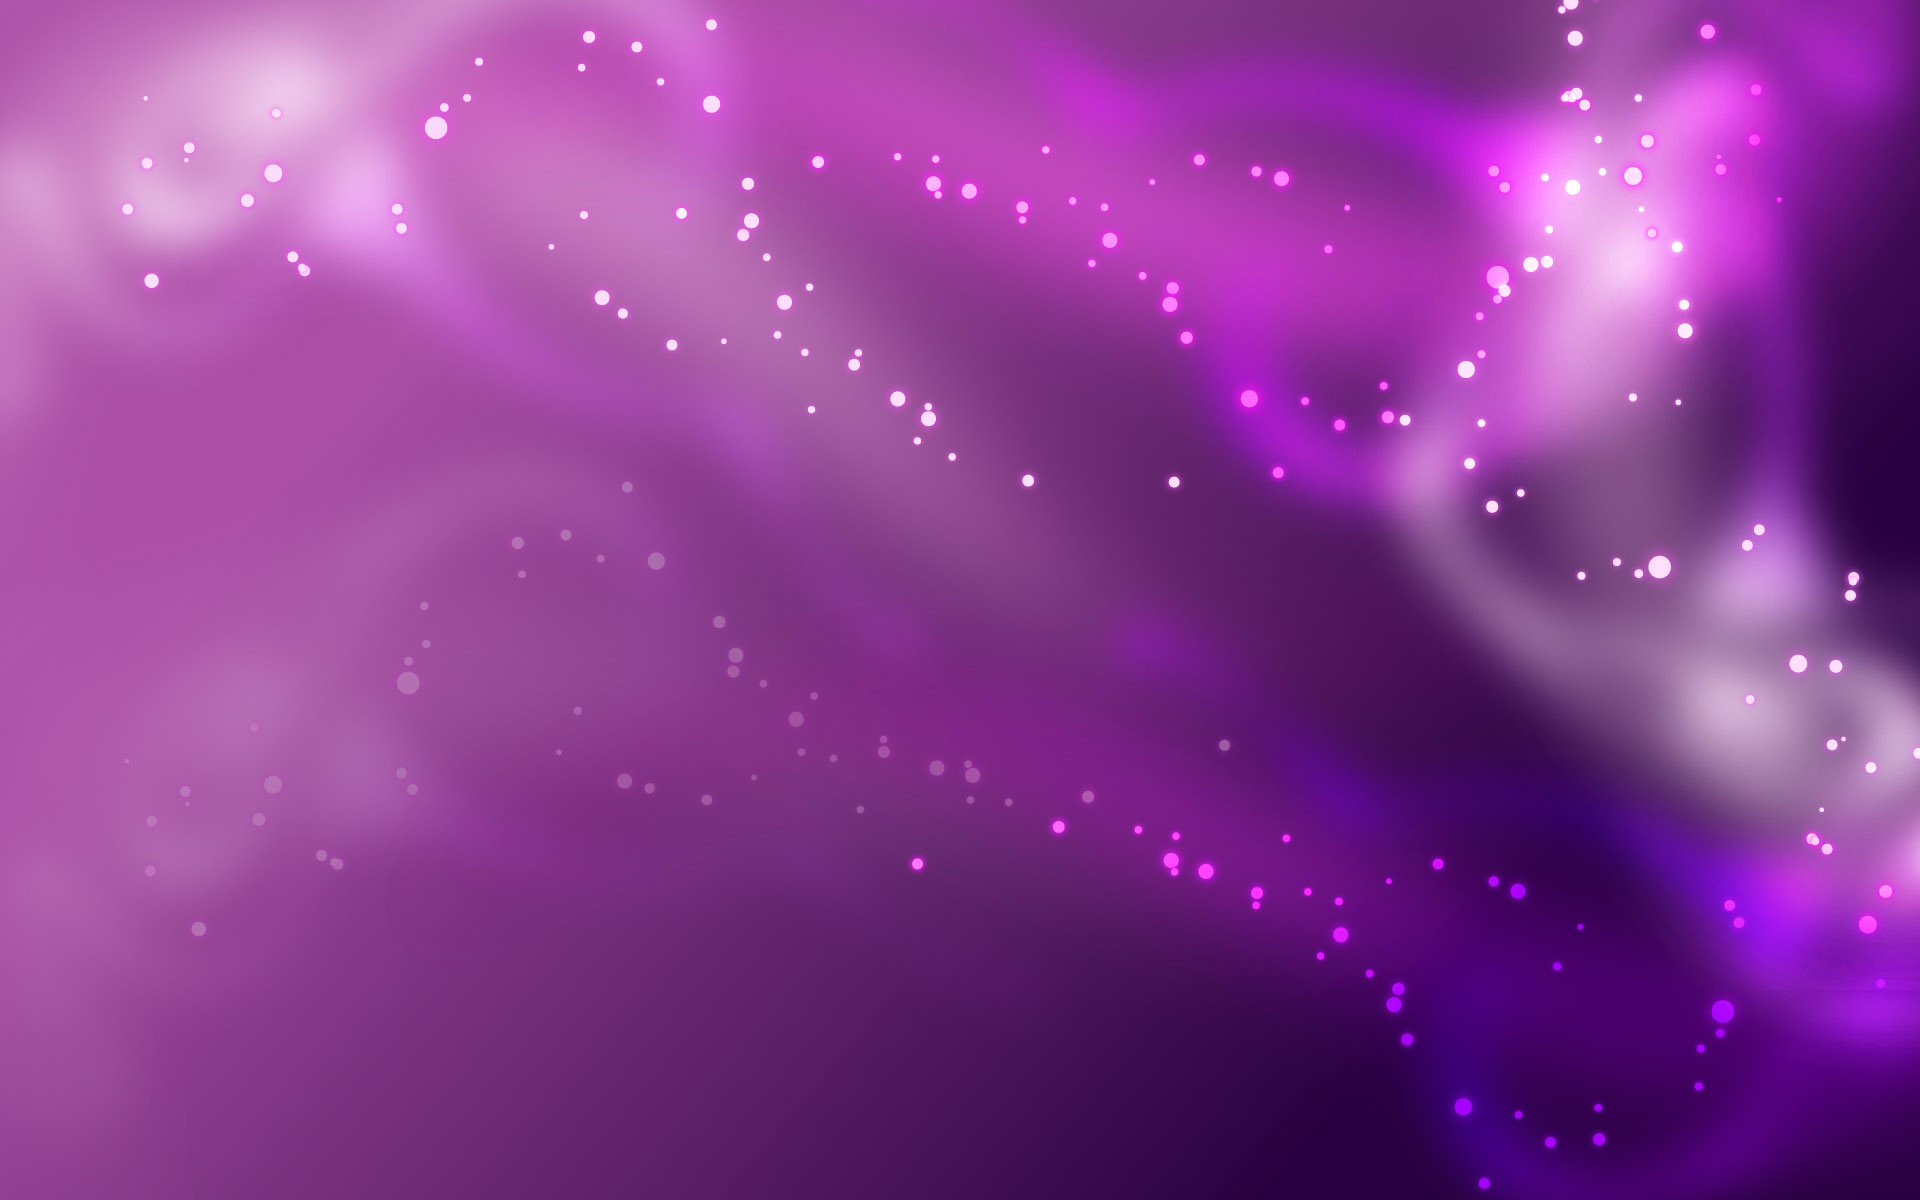 1920x1200 Purple background with stars and flowers PPT Backgrounds